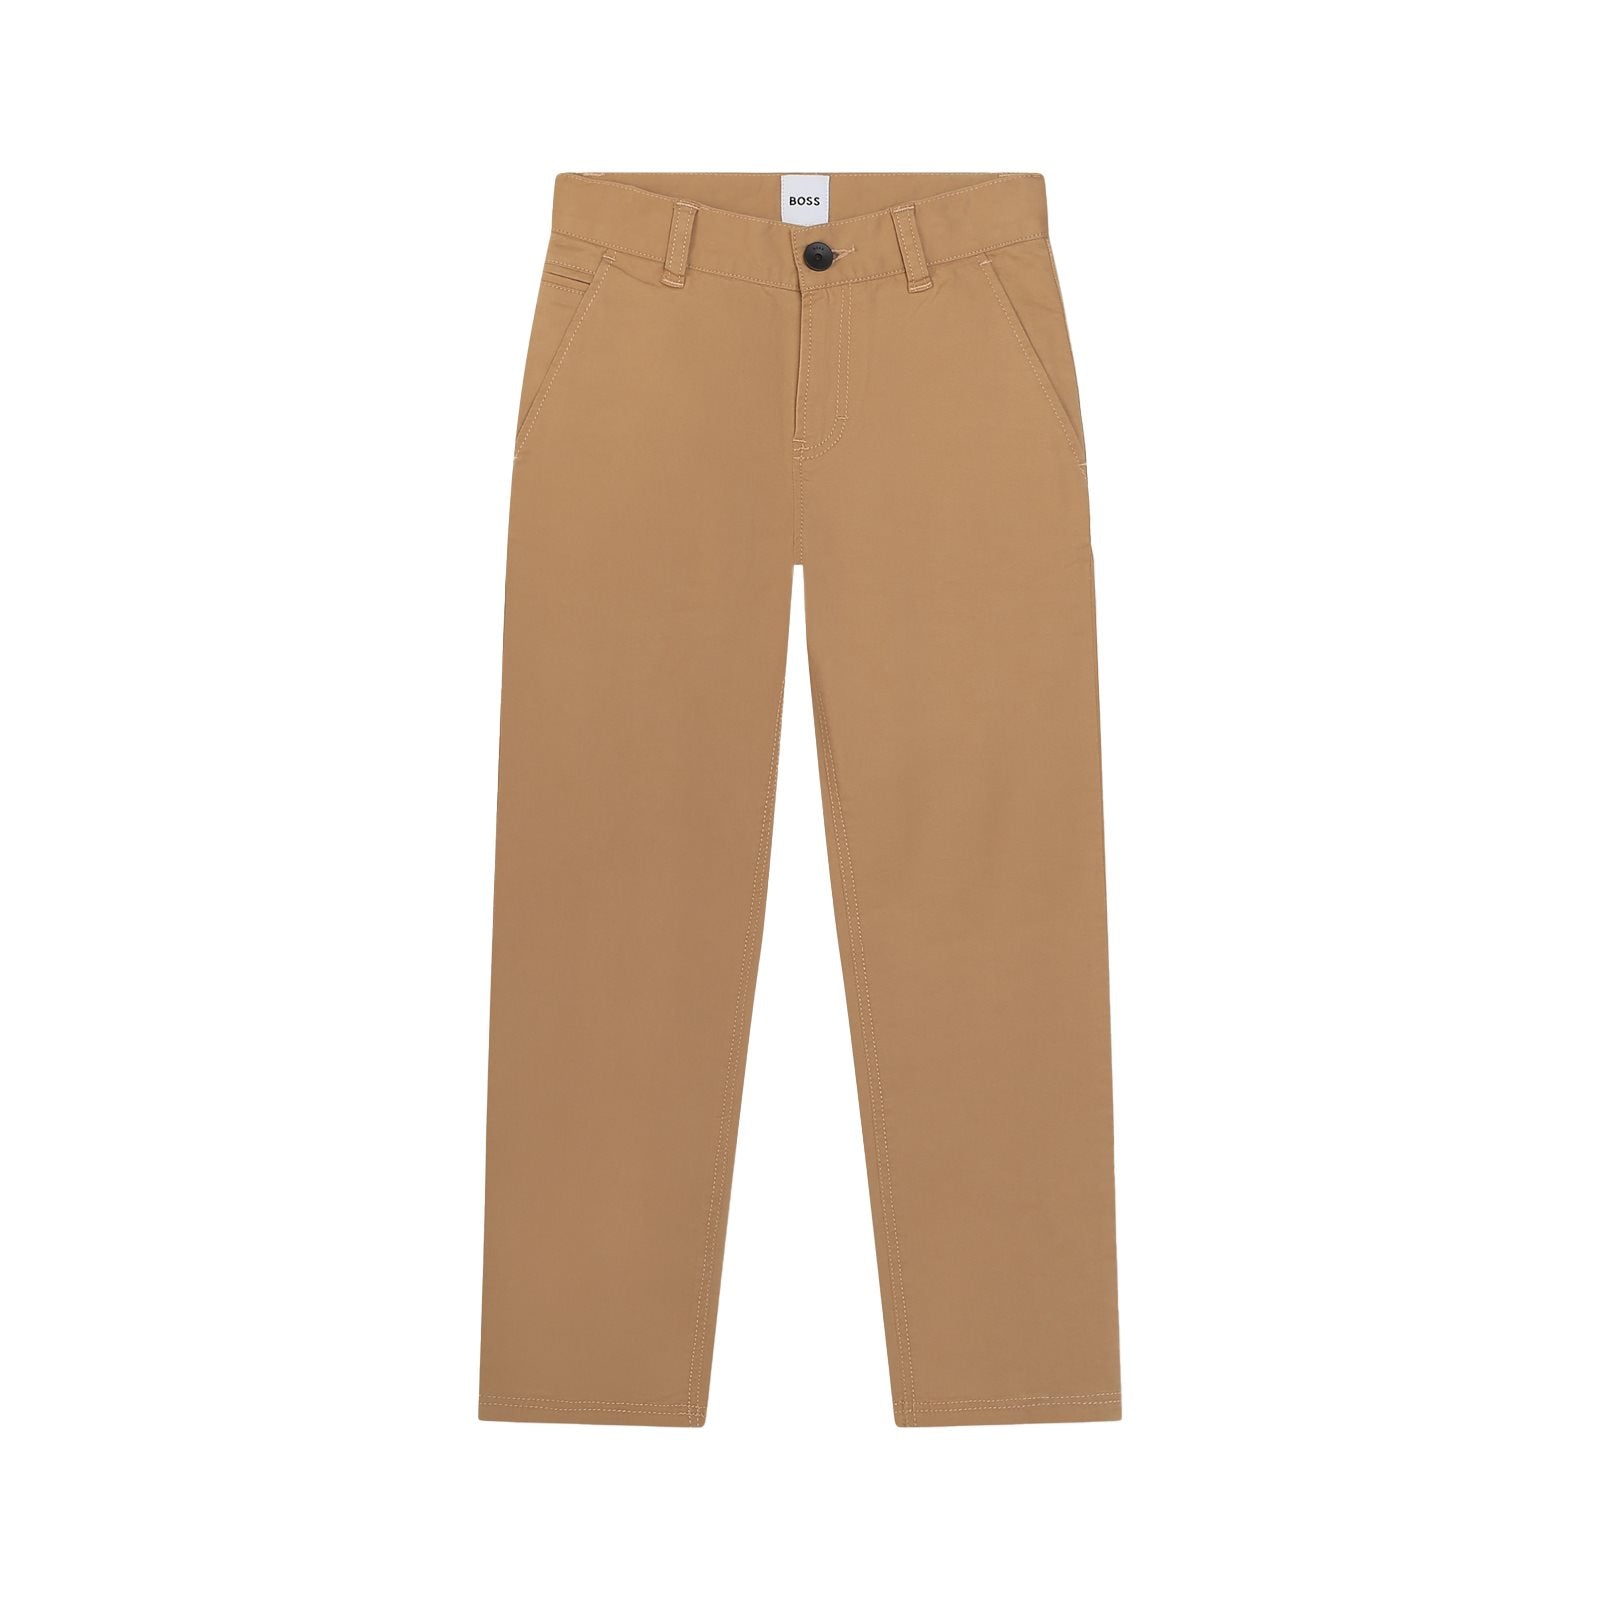 Cotton twill chino trousers